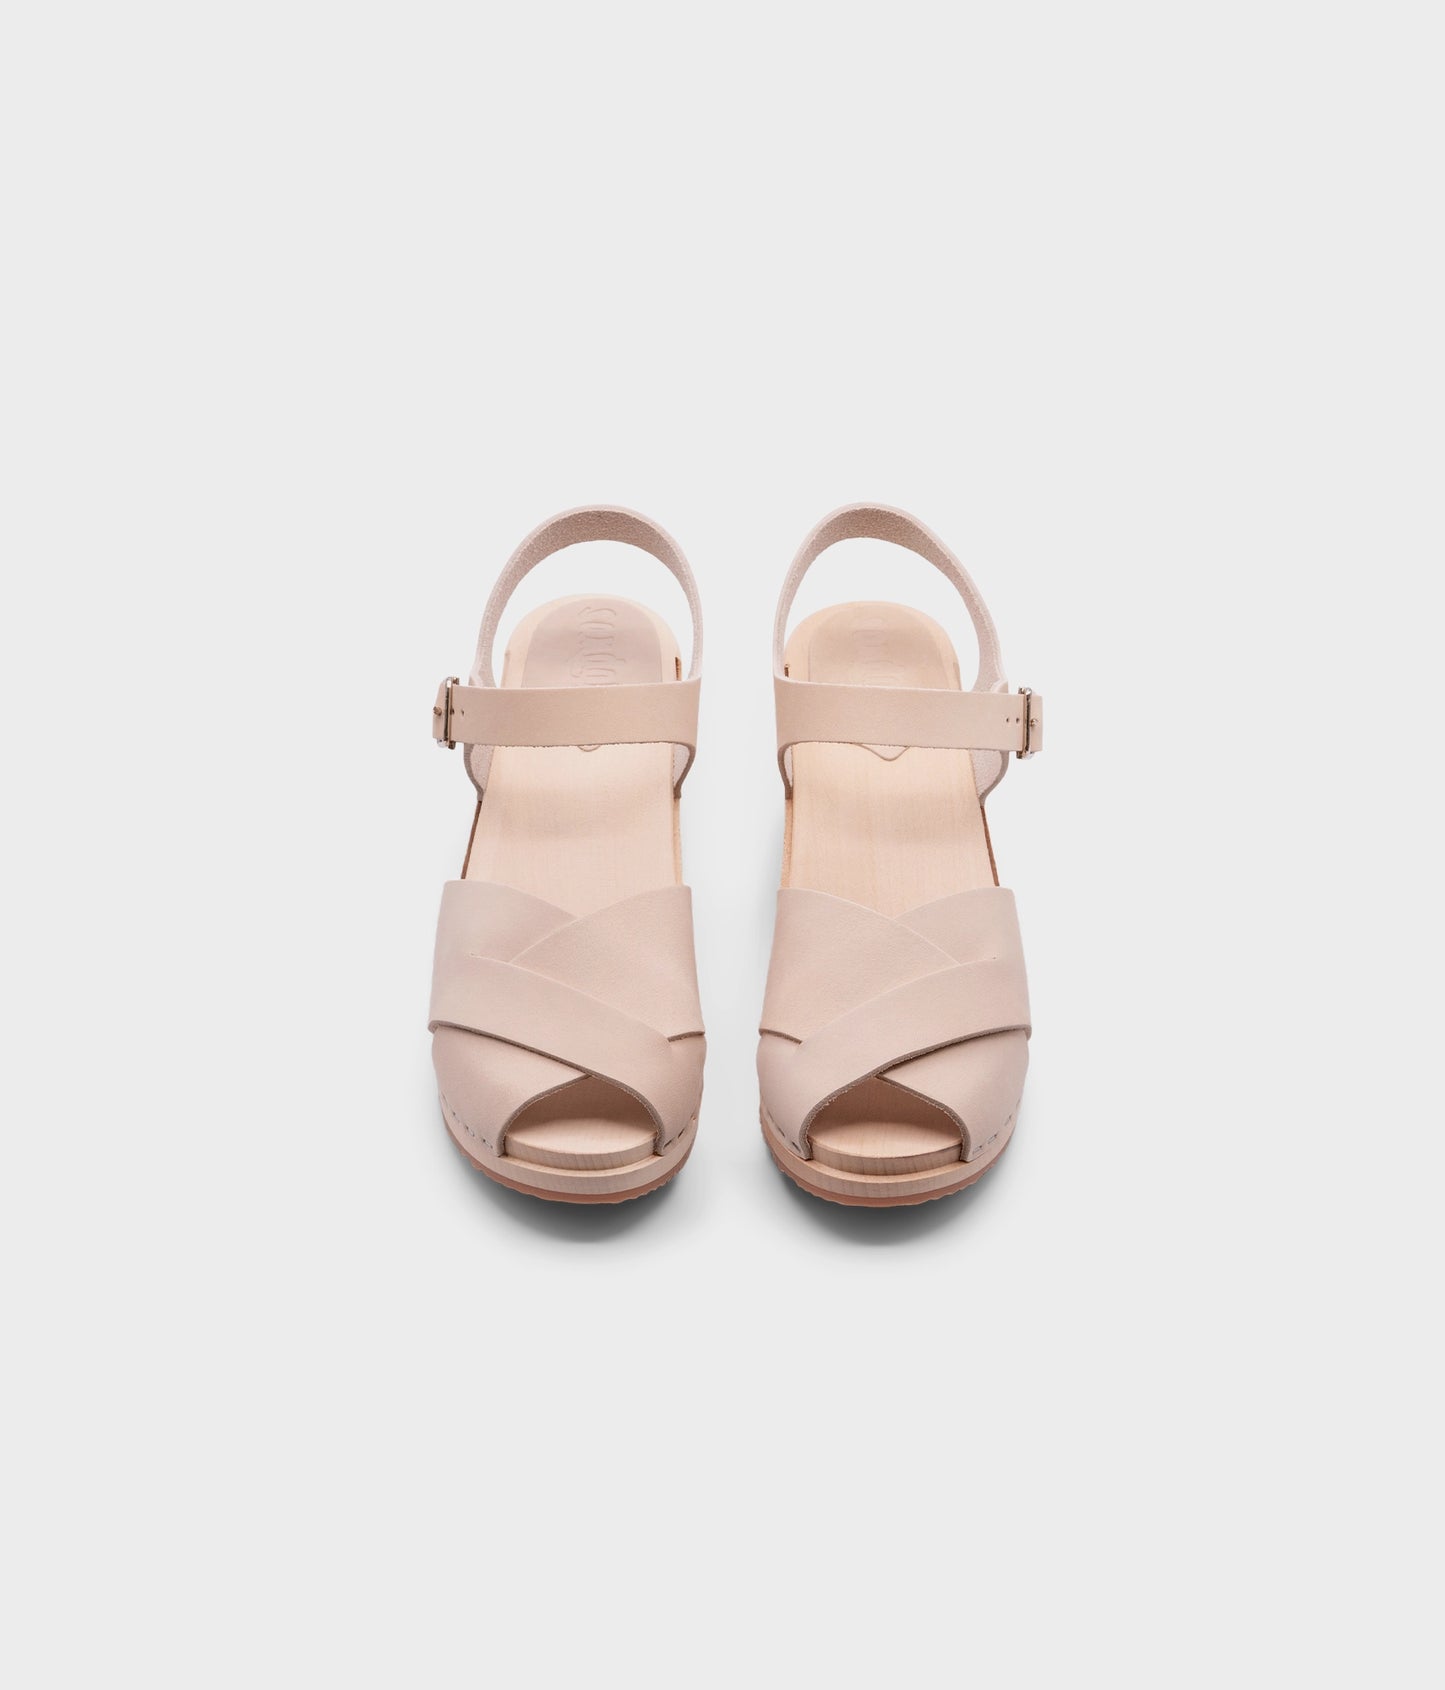 high heeled clog sandals in sand white nubuck leather with an open-toe stapled on a light wooden base